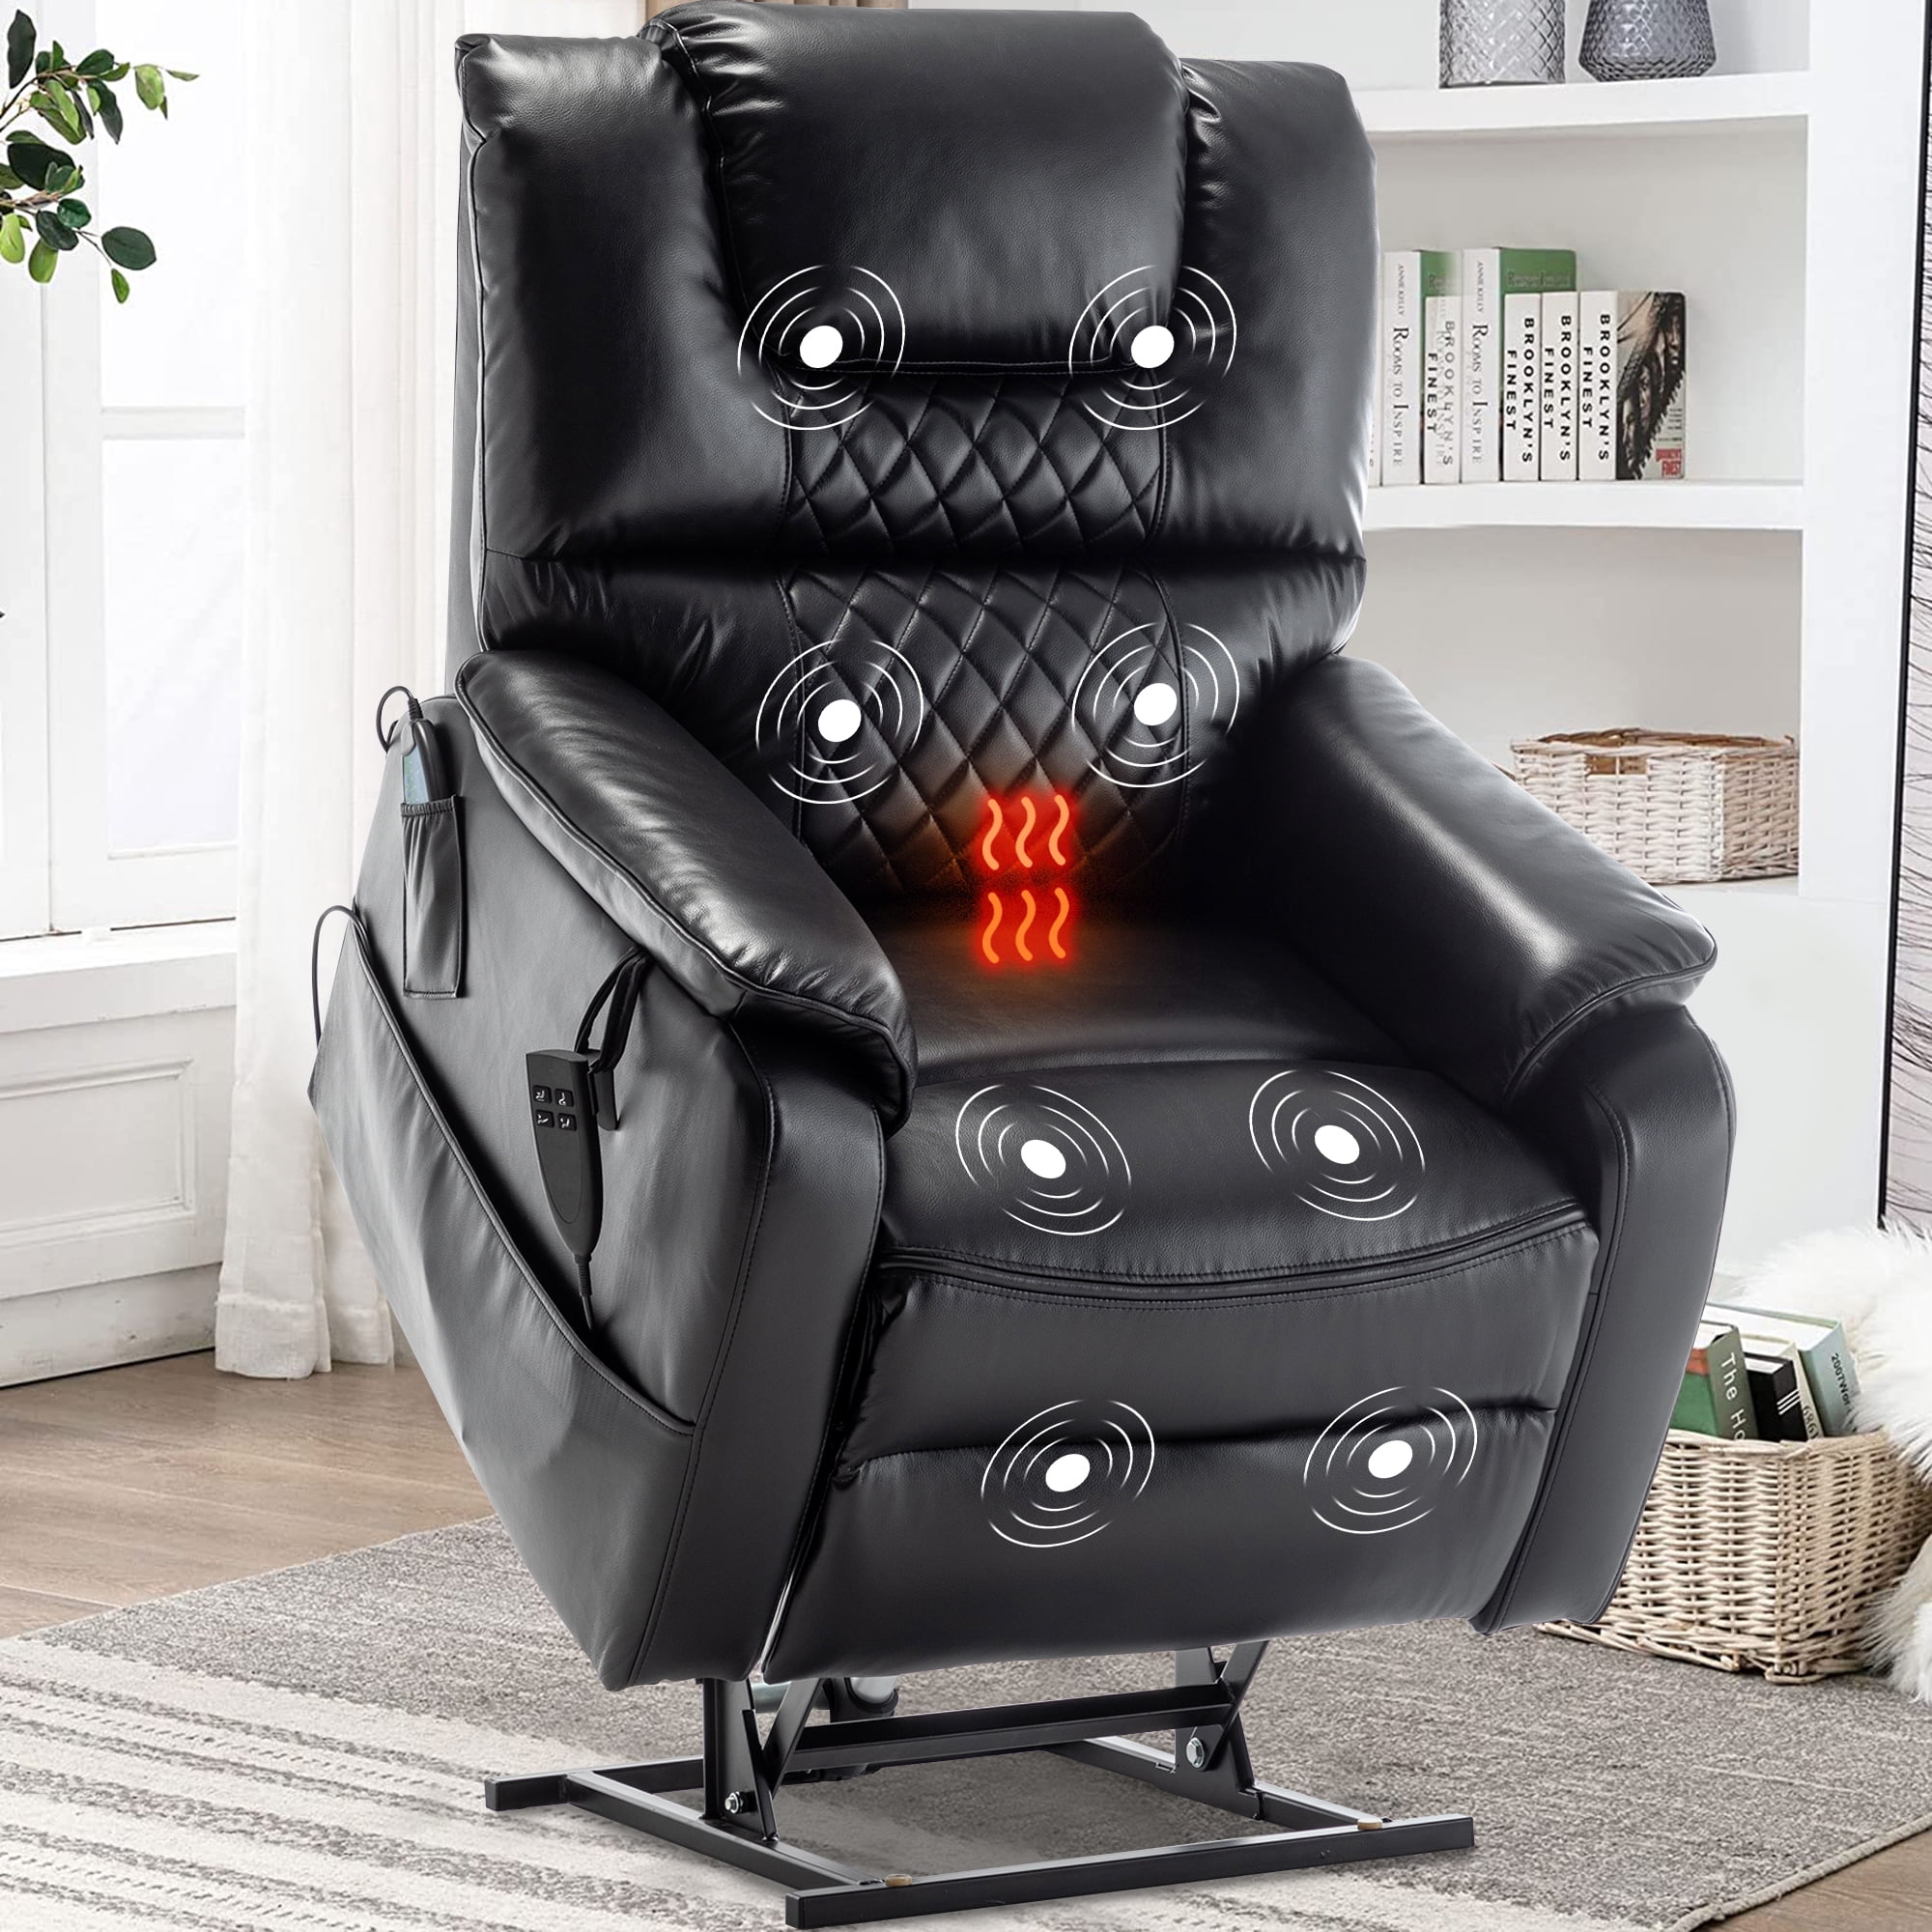 Halifax North America Manual 41.75 High Recliner Armchair PU Leather Lounge Chair with Adjustable Leg Rest | Mathis Home